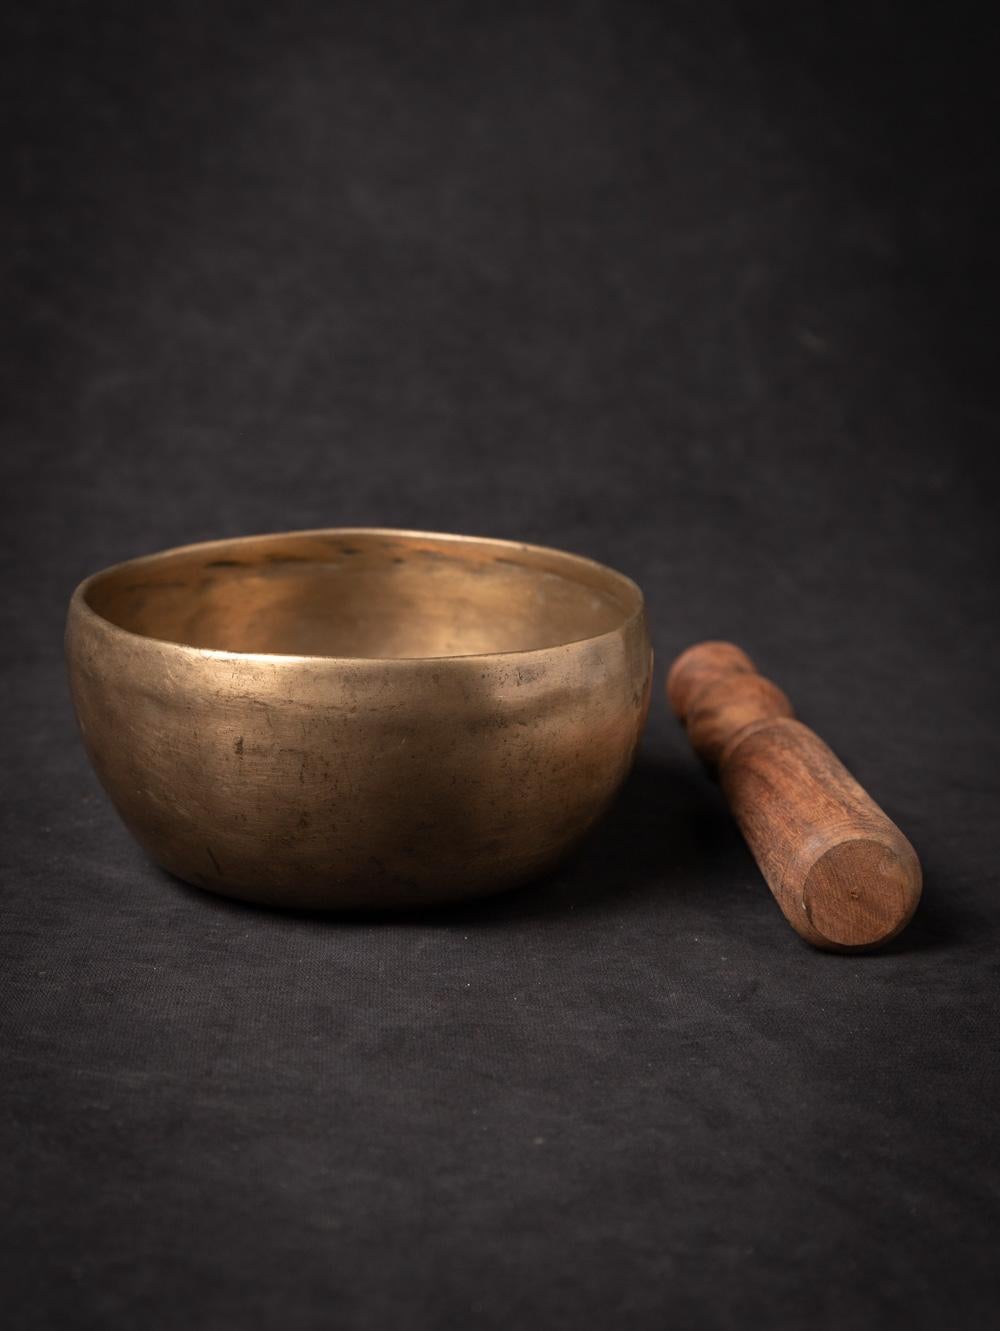 Antique bronze Nepali Singing bowl
Material : bronze
6,9 cm high
13,8 cm diameter
Early 20th century
With a beautiful sound !
Weight: 511 grams
Originating from Nepal
Nr: S-58